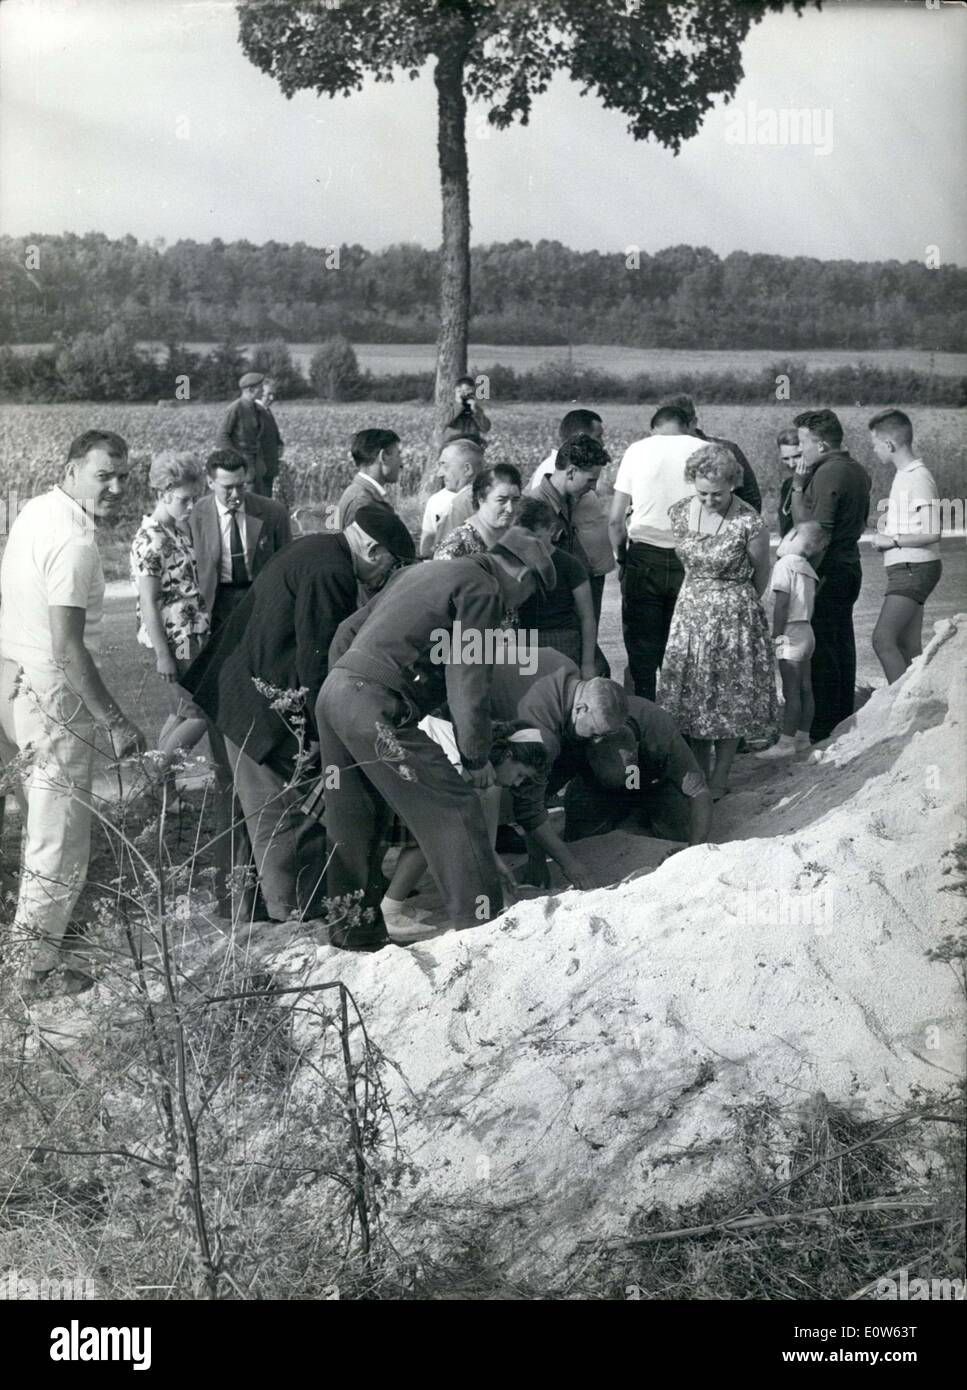 Sep. 10, 1961 - Bomb Attack On De Gaulle: Photo shows Crowd before the heap of sand in which the plastic bomb was hidden on the Stock Photo